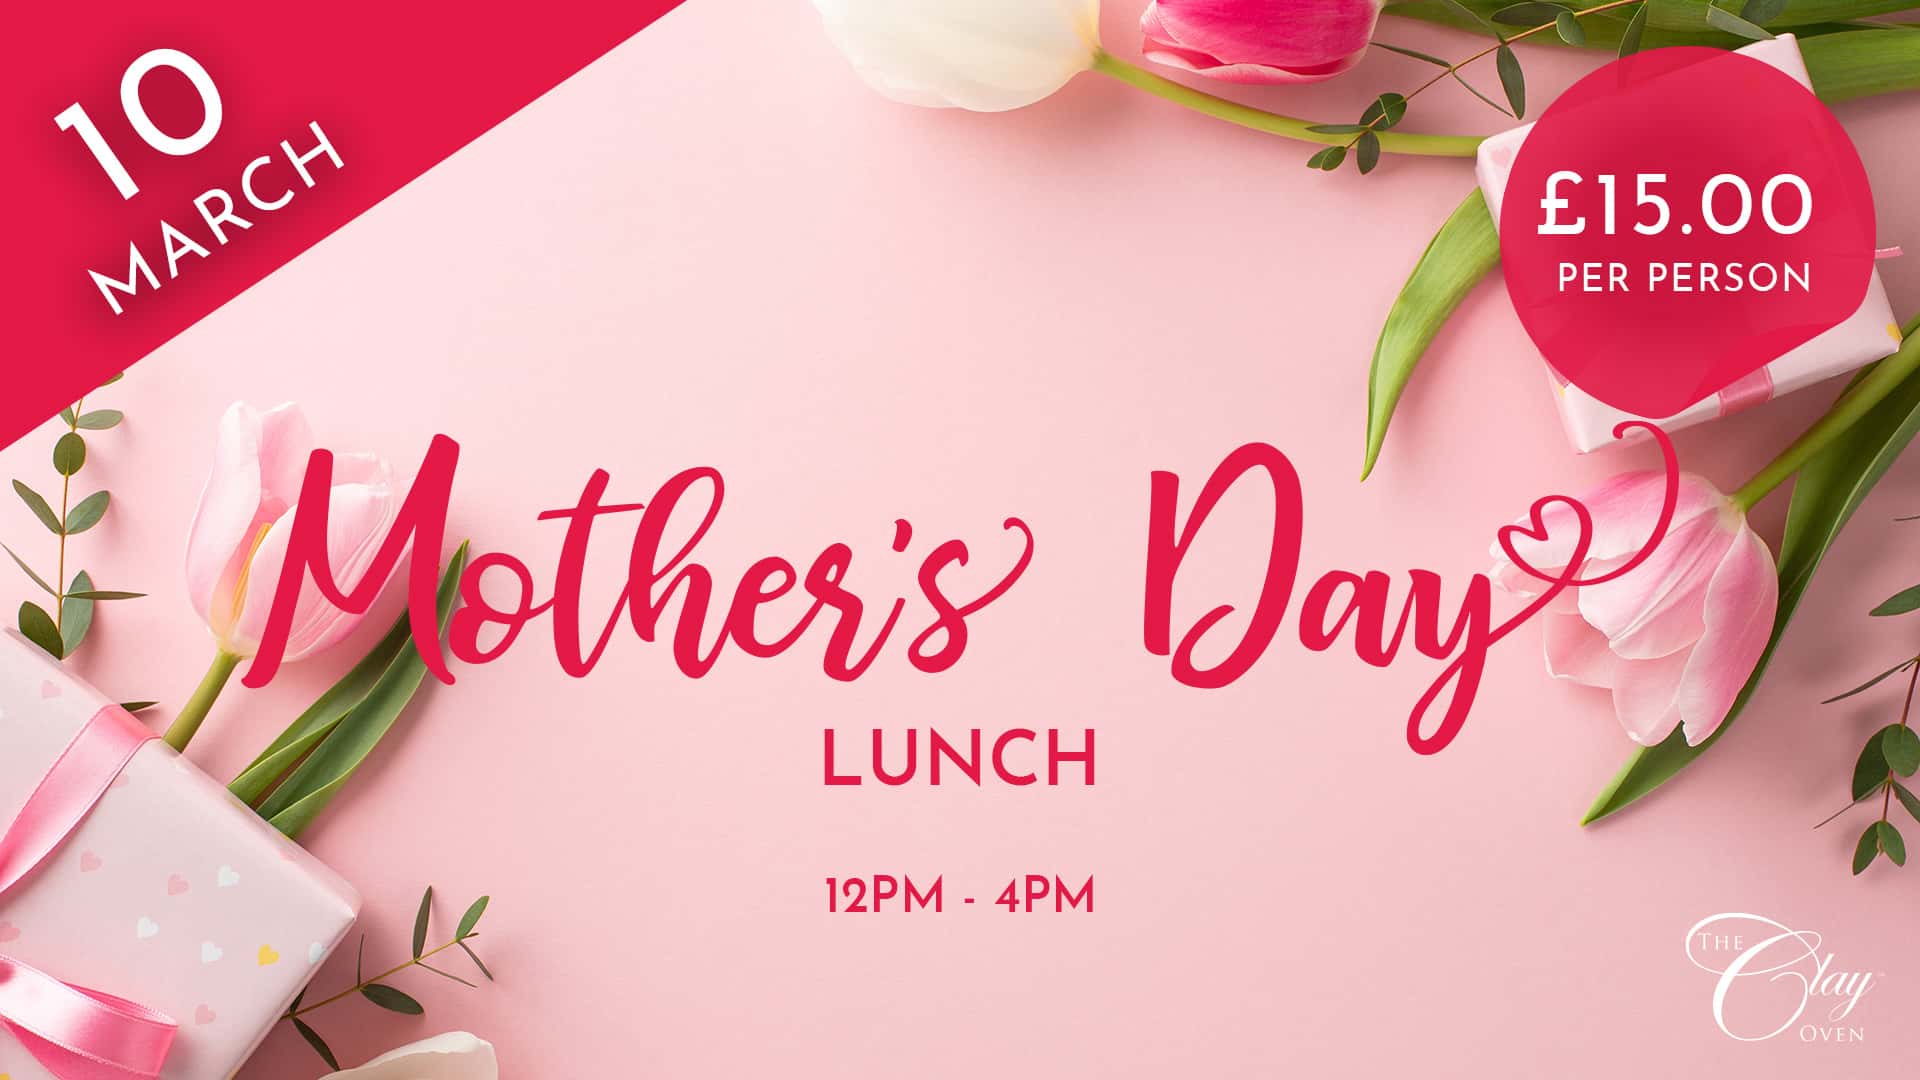 A pink background with flowers and a special Mother's Day meal.